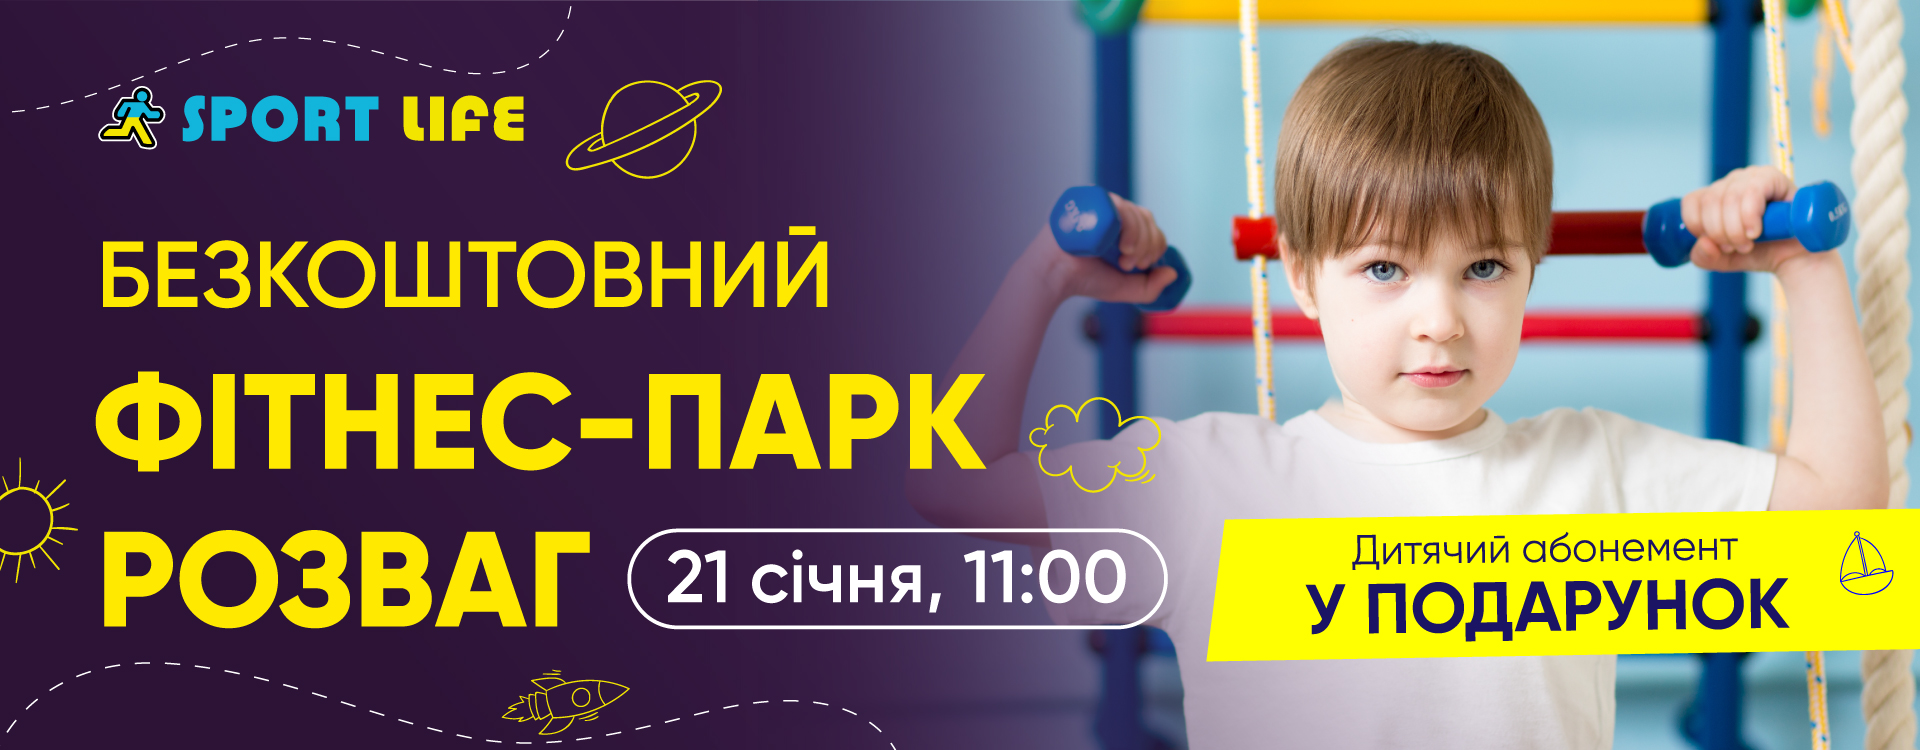 Free FITNESS PARK FUN for children at Sport Life